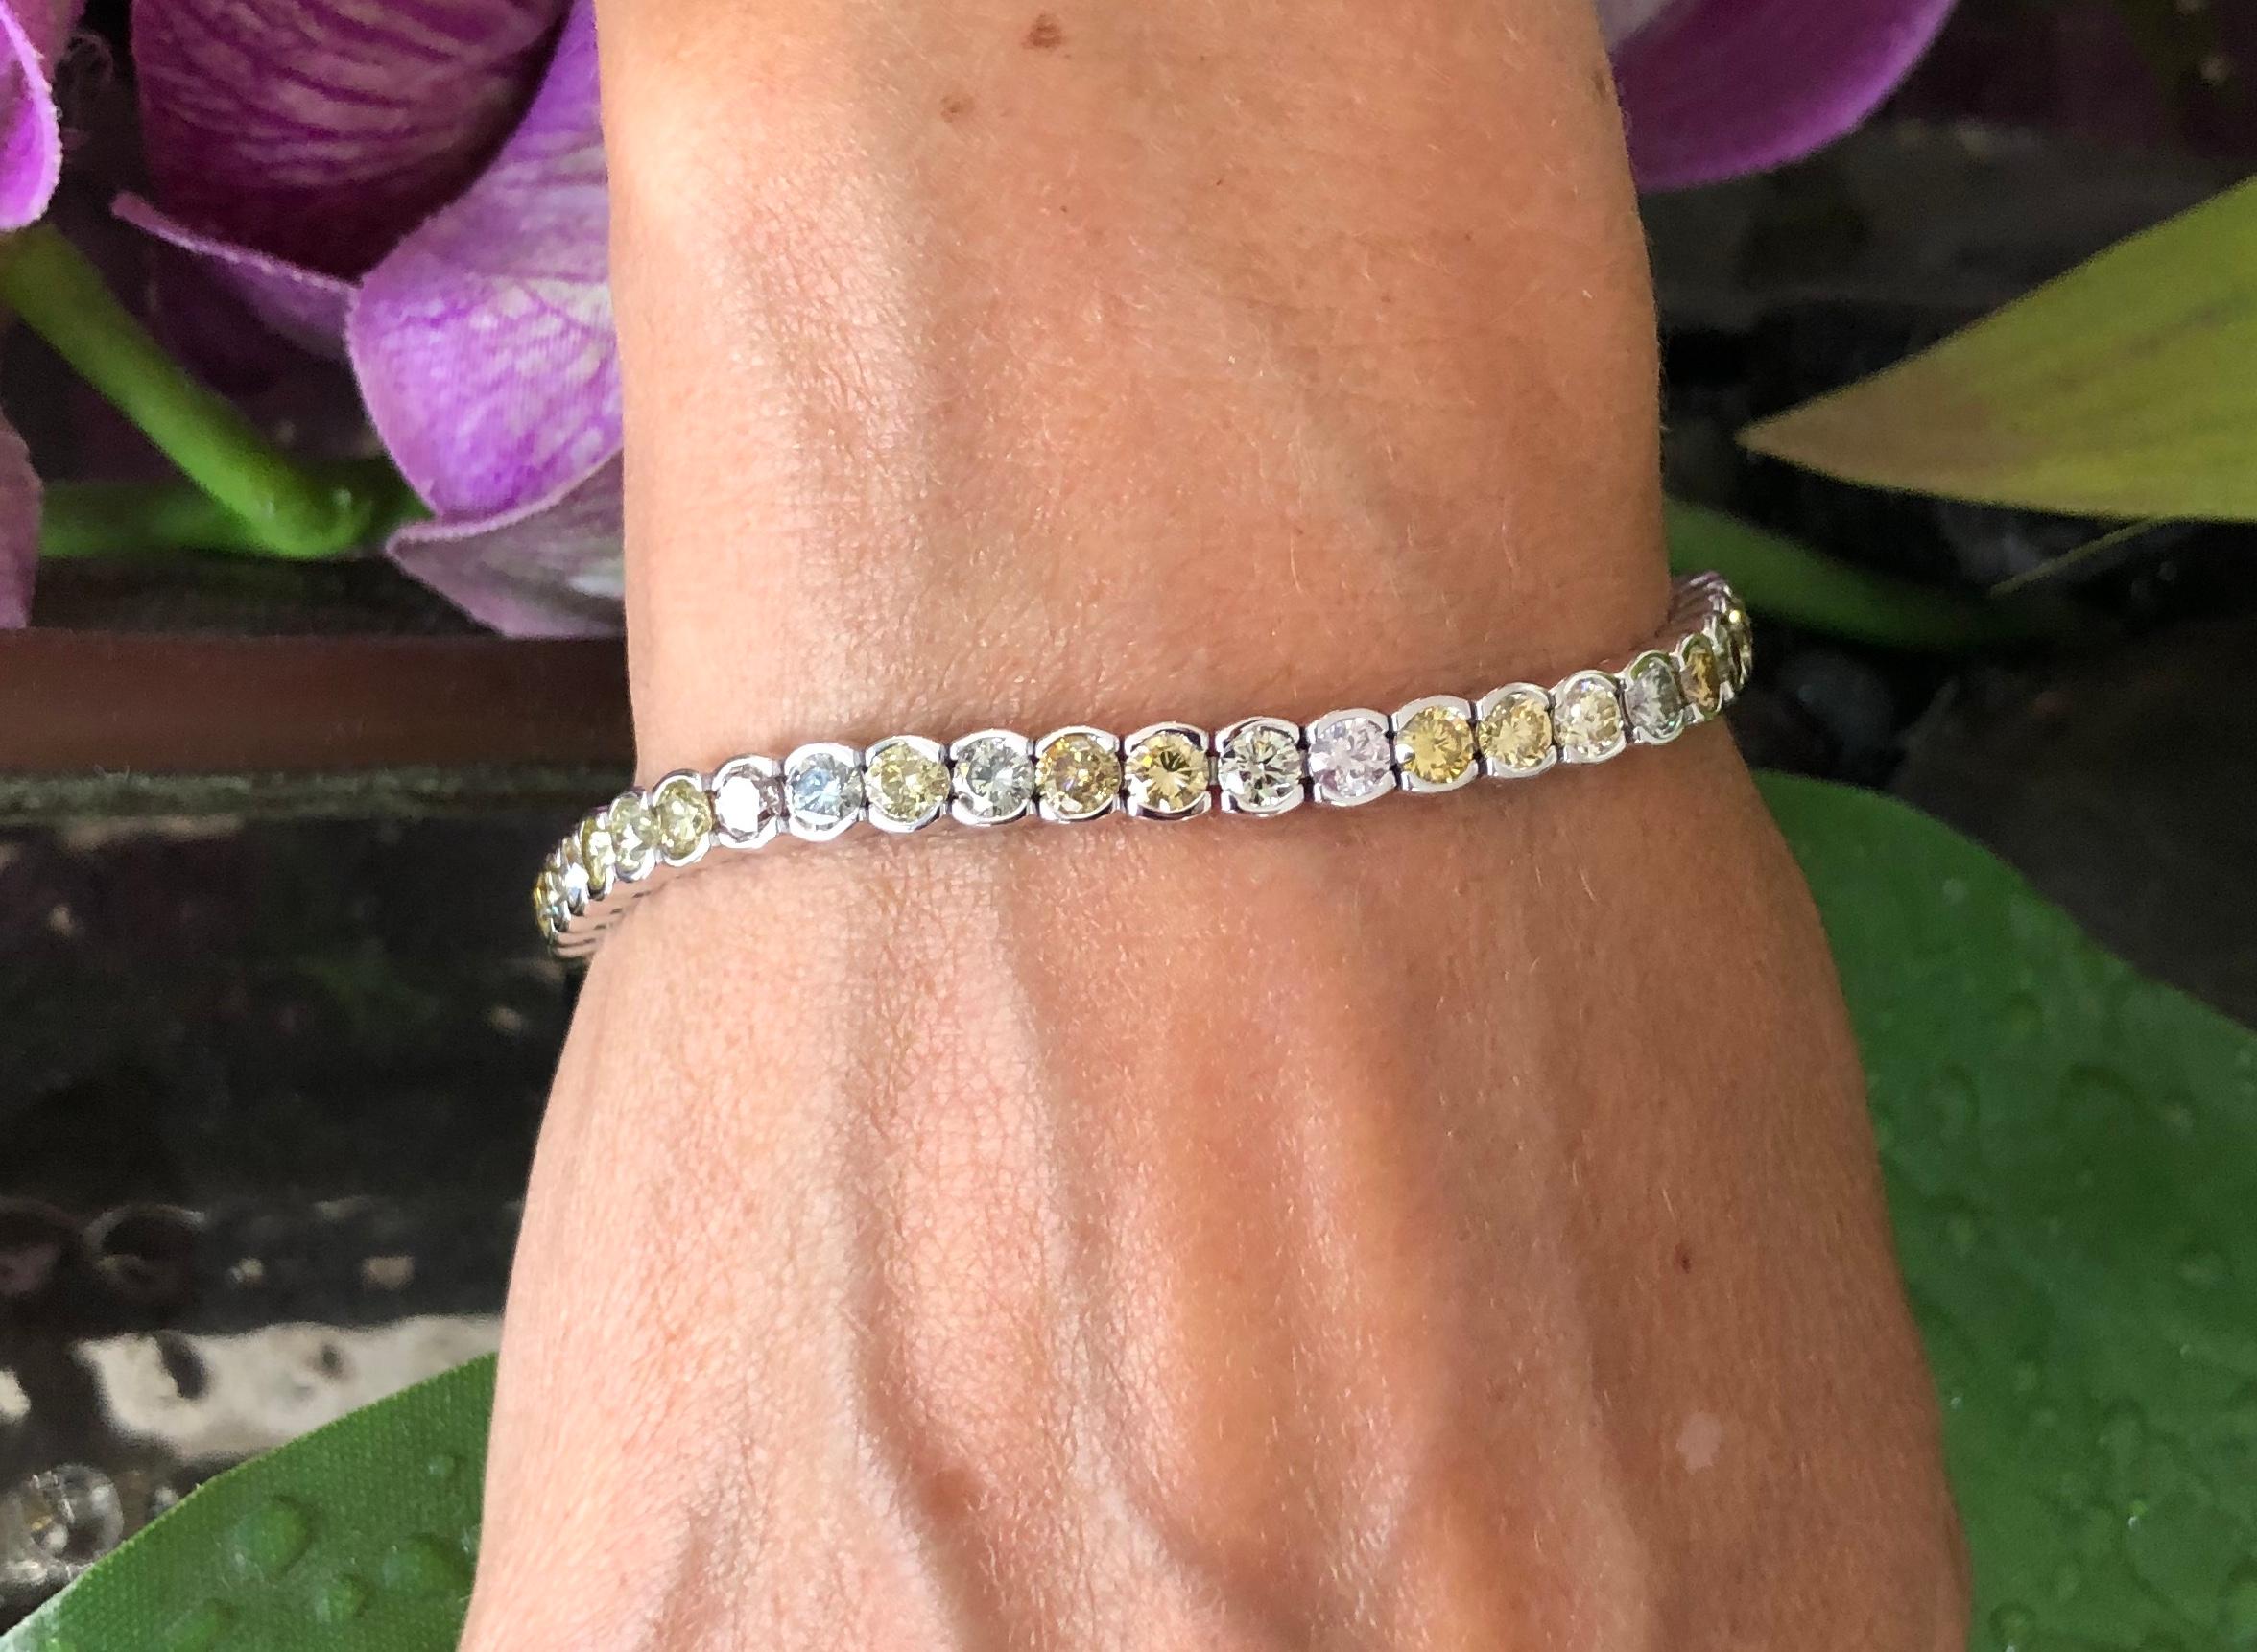 Offered here is a gorgeous bezel set diamond tennis bracelet in 18kt white gold. The bracelet is set with fourth nine ( 49 ) natural round brilliant cut diamonds. All the diamonds are natural color ranging from light brown to dark brown, different